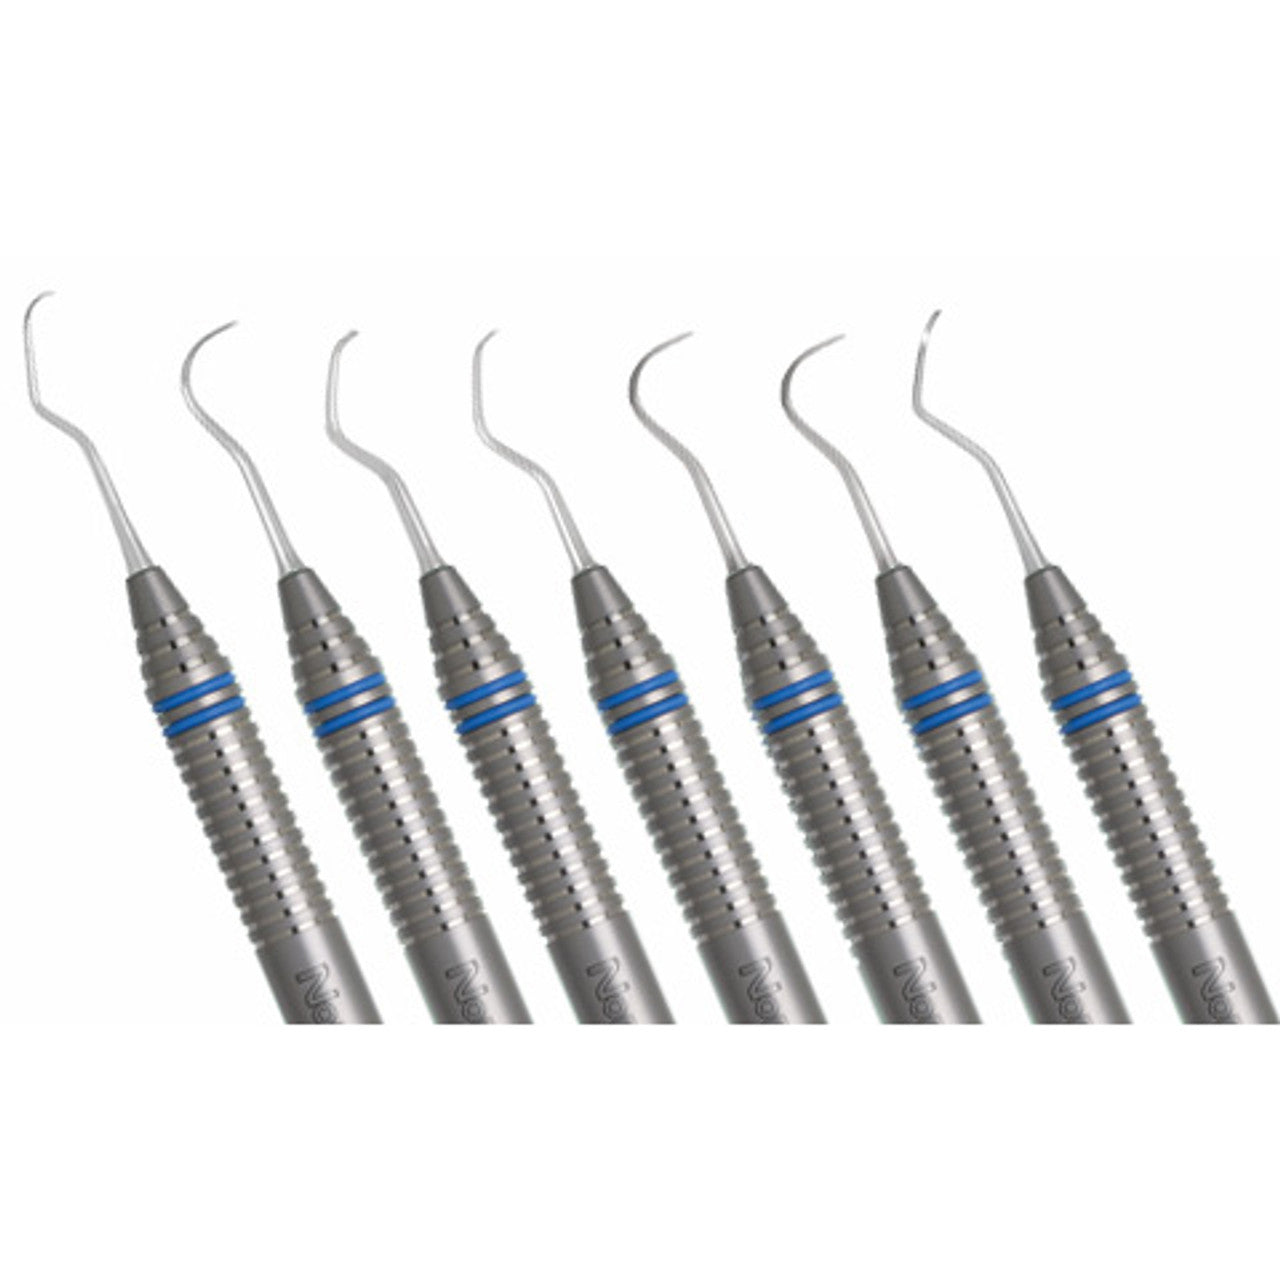 Nordent CEENMA5730 30mm Nickel Titanium Root Canal Spreader with DuraLite ColorRings Handle